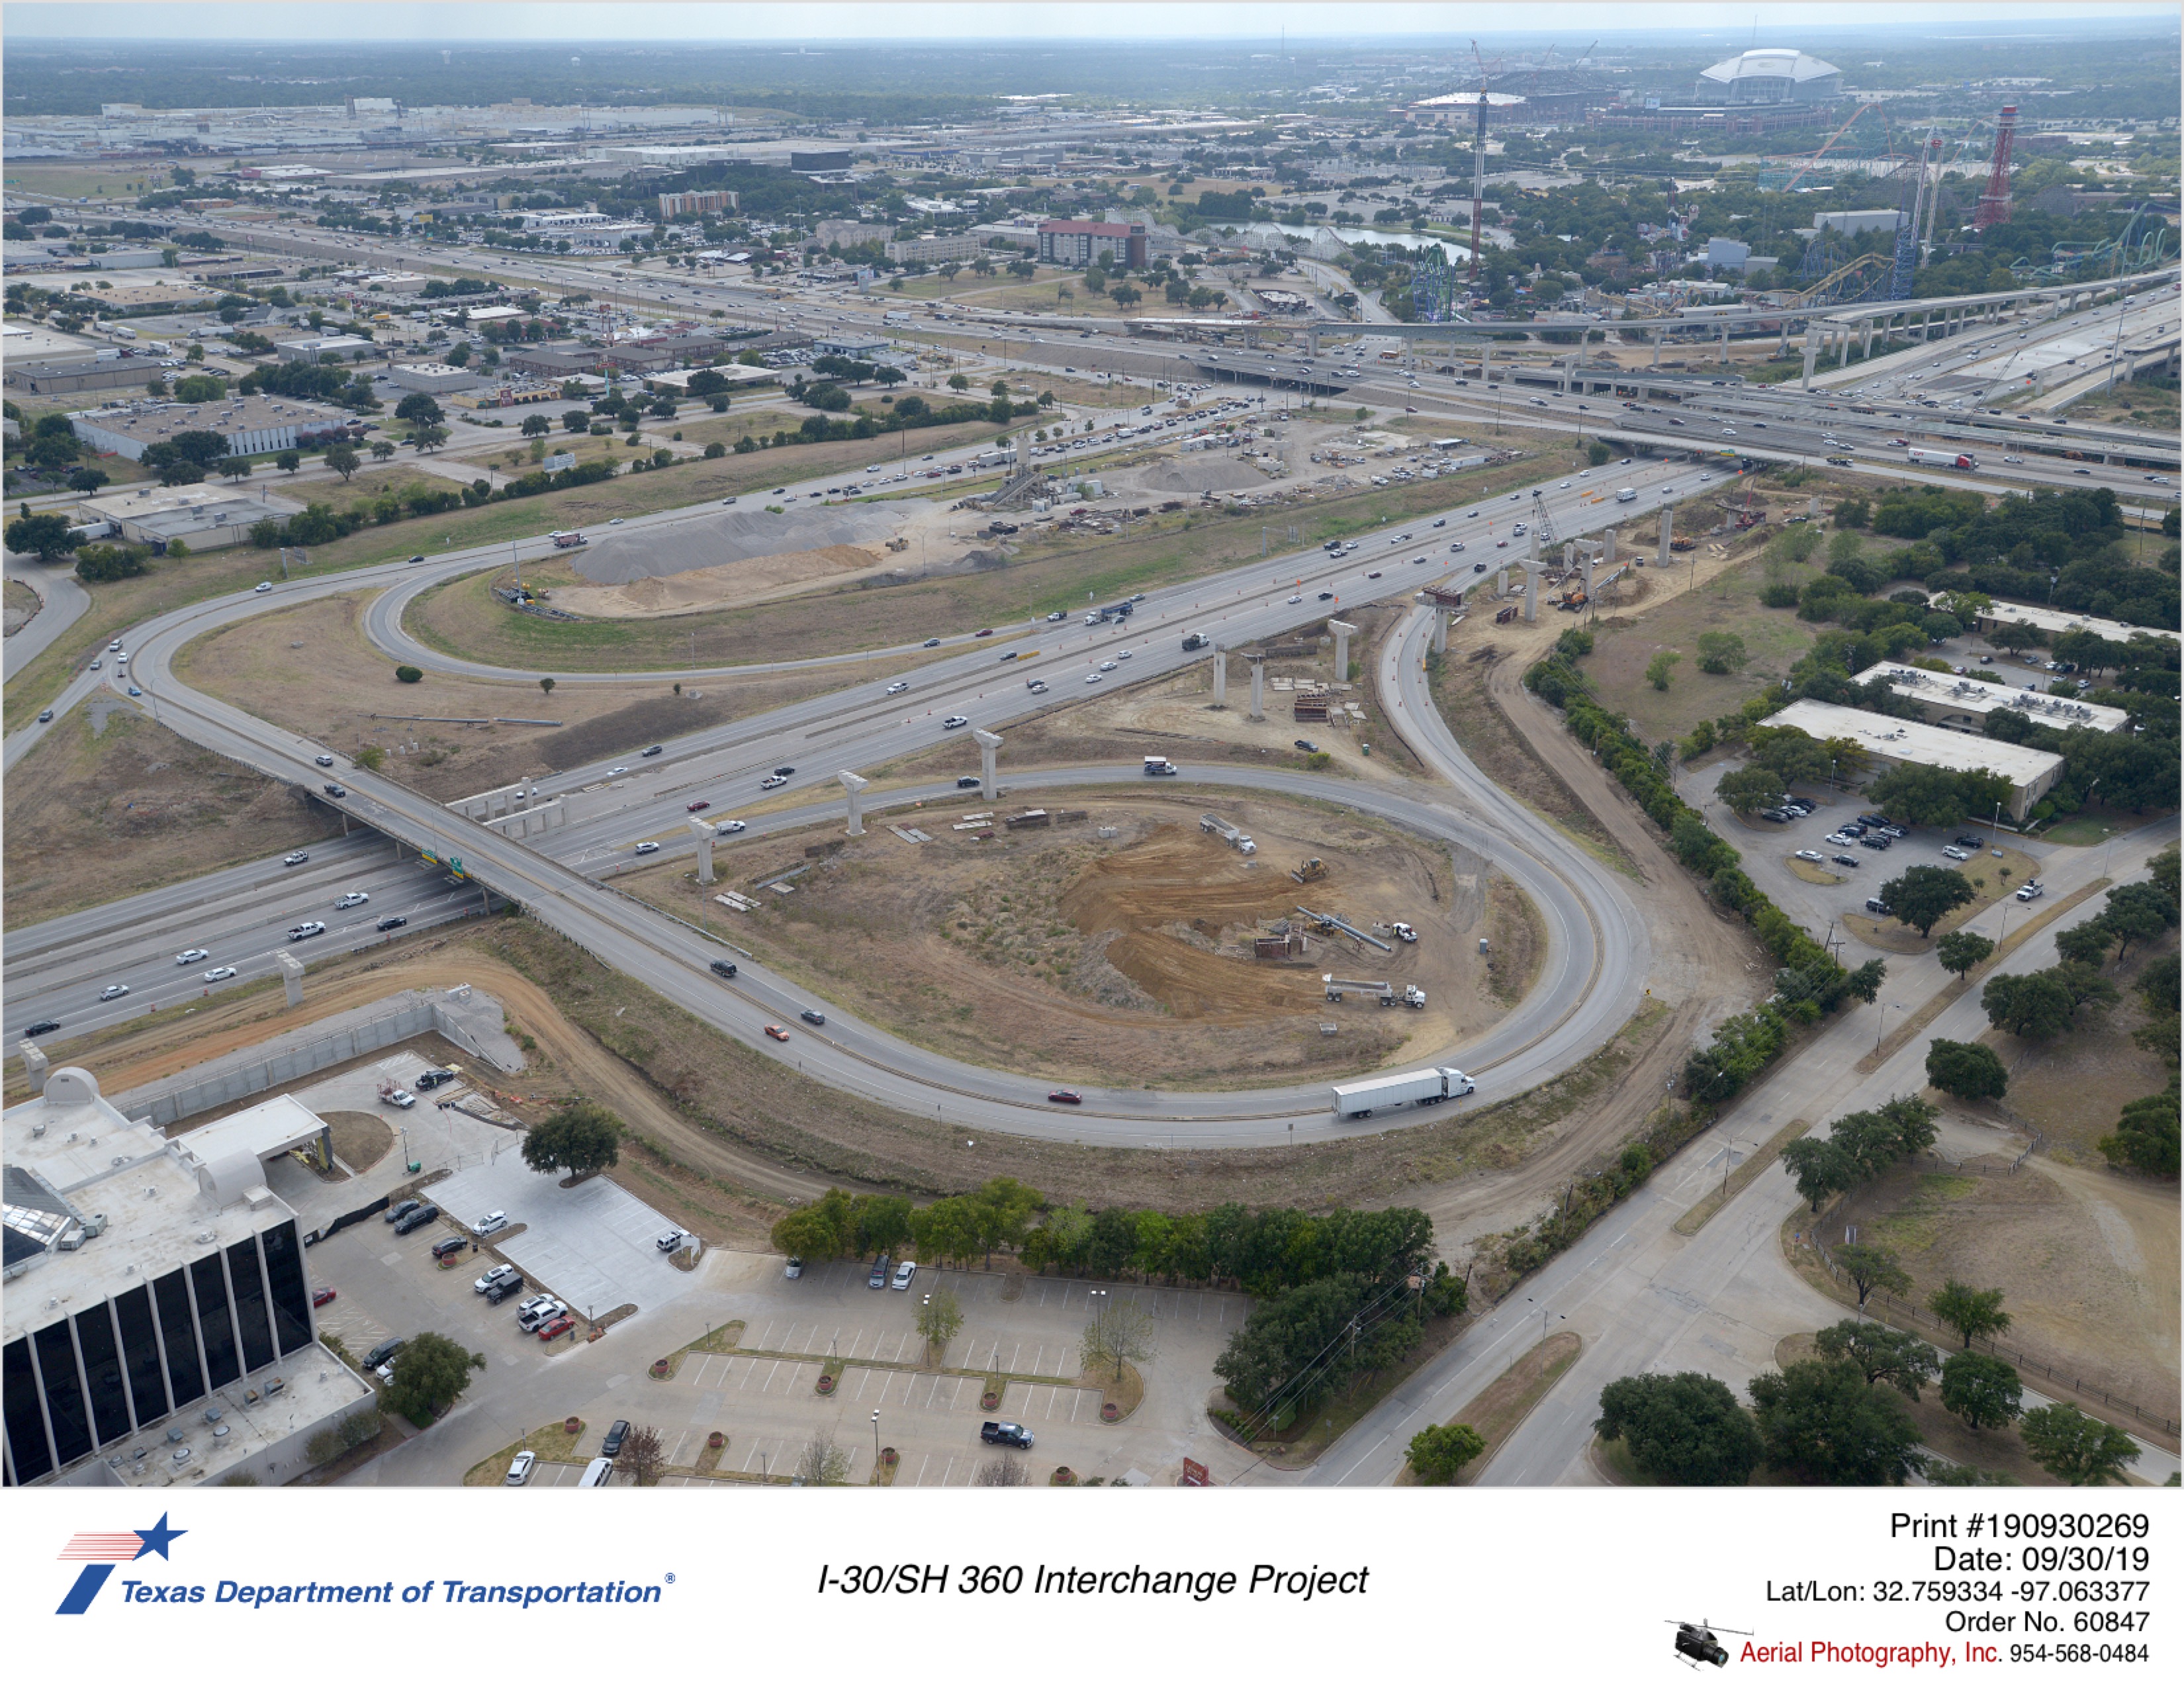 I-30/SH 360 interchange looking southwest. Construction of direct connector ramps in northeast quadrant.